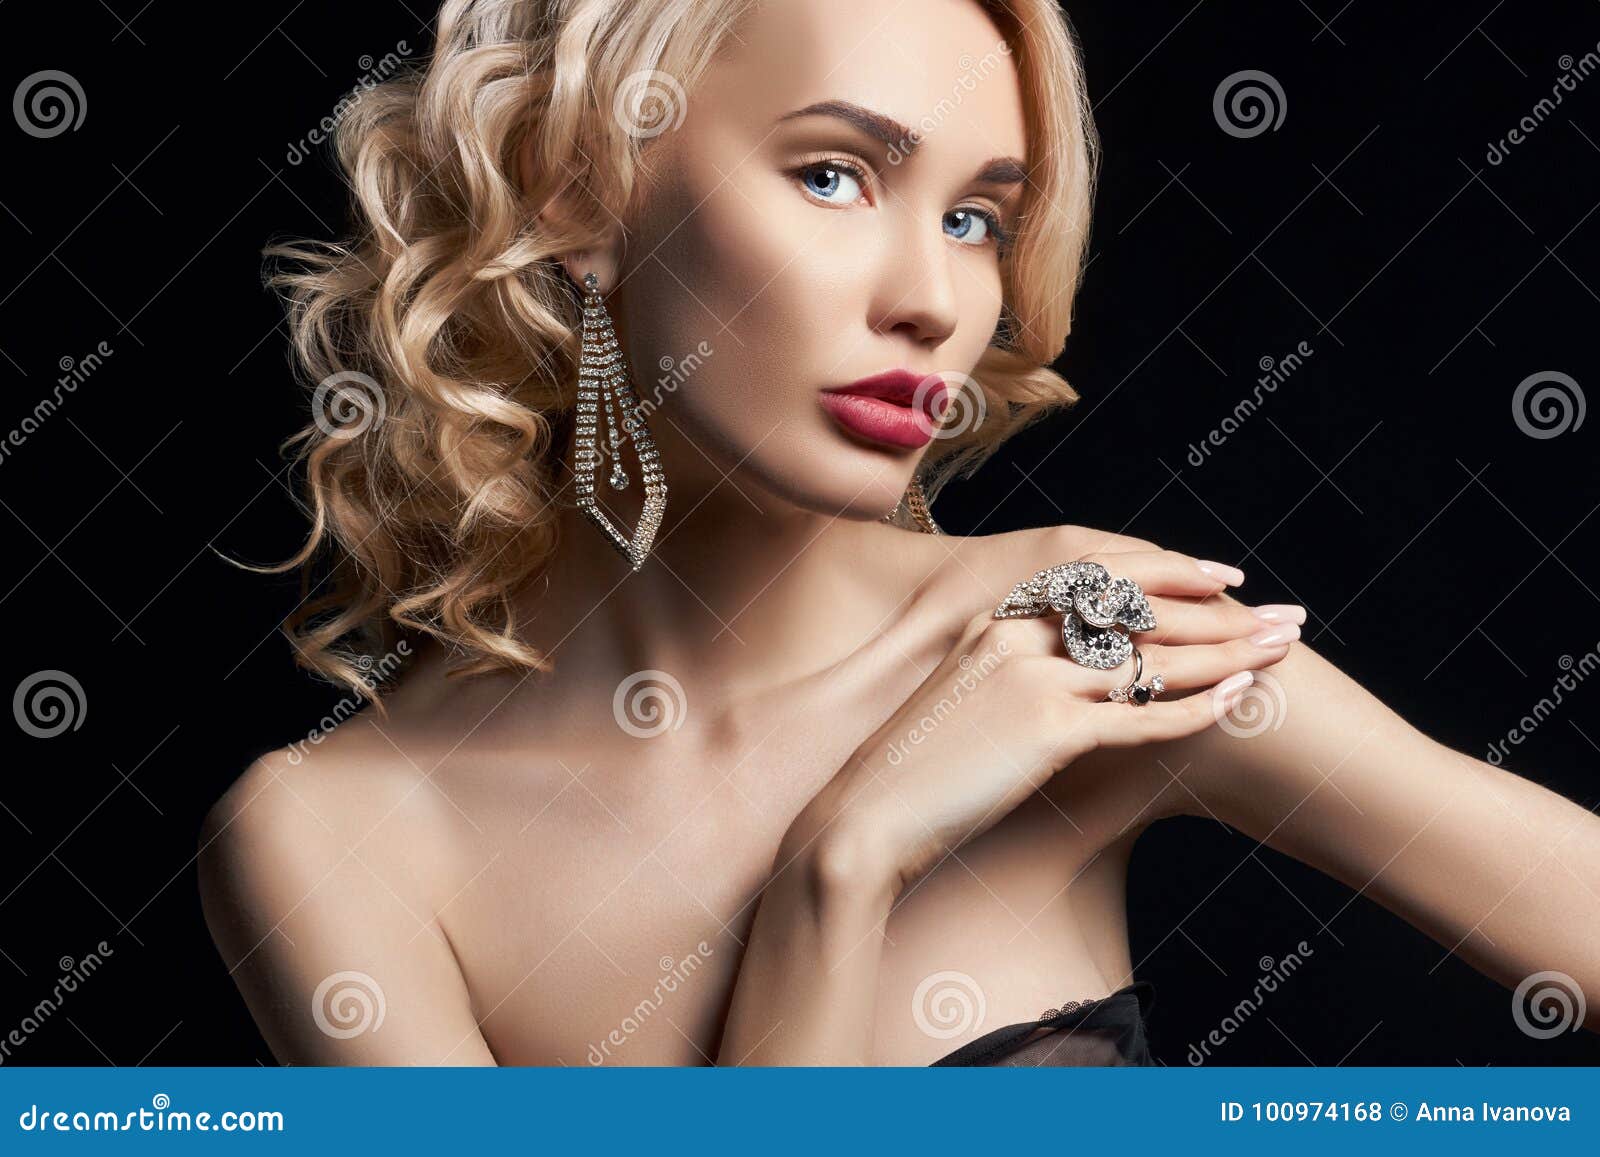 Fashion Beauty Nude Blonde Woman On A Dark Background. Girl ...